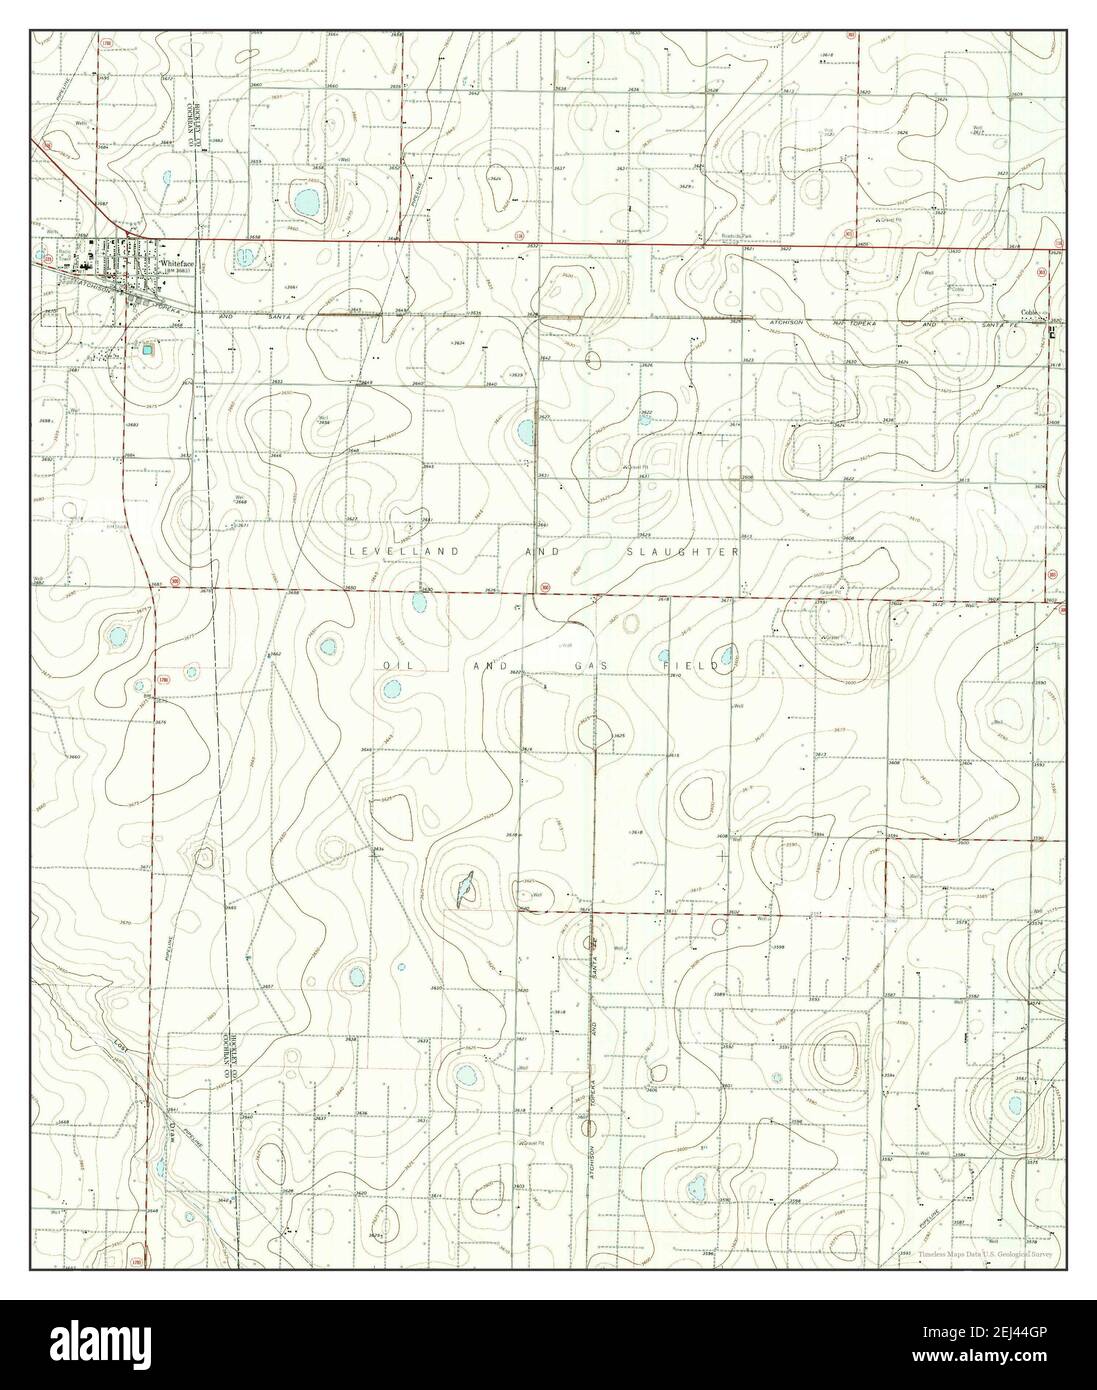 Whiteface, Texas, map 1965, 1:24000, United States of America by Timeless Maps, data U.S. Geological Survey Stock Photo